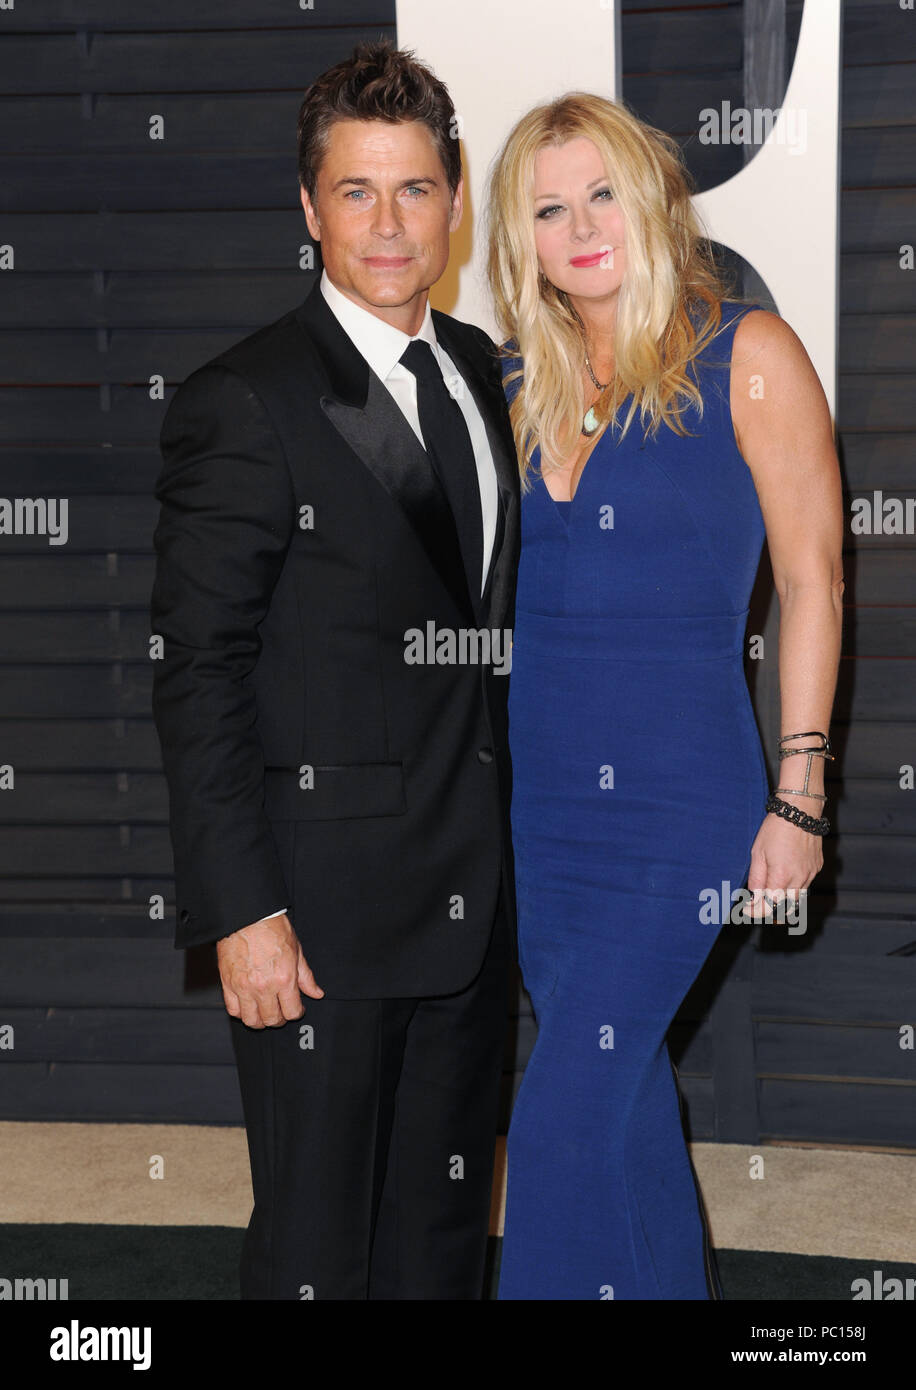 Rob Lowe, Sheryl Berkoff 304 at the 2015 Vanity Fair Oscars party at the Wallis Annenberg Center for the Performing Arts on February 22, 2015 in Beverly Hills, Rob Lowe, Sheryl Berkoff 304 ------------- Red Carpet Event, Vertical, USA, Film Industry, Celebrities,  Photography, Bestof, Arts Culture and Entertainment, Topix Celebrities fashion /  Vertical, Best of, Event in Hollywood Life - California,  Red Carpet and backstage, USA, Film Industry, Celebrities,  movie celebrities, TV celebrities, Music celebrities, Photography, Bestof, Arts Culture and Entertainment,  Topix, Three Quarters, vert Stock Photo